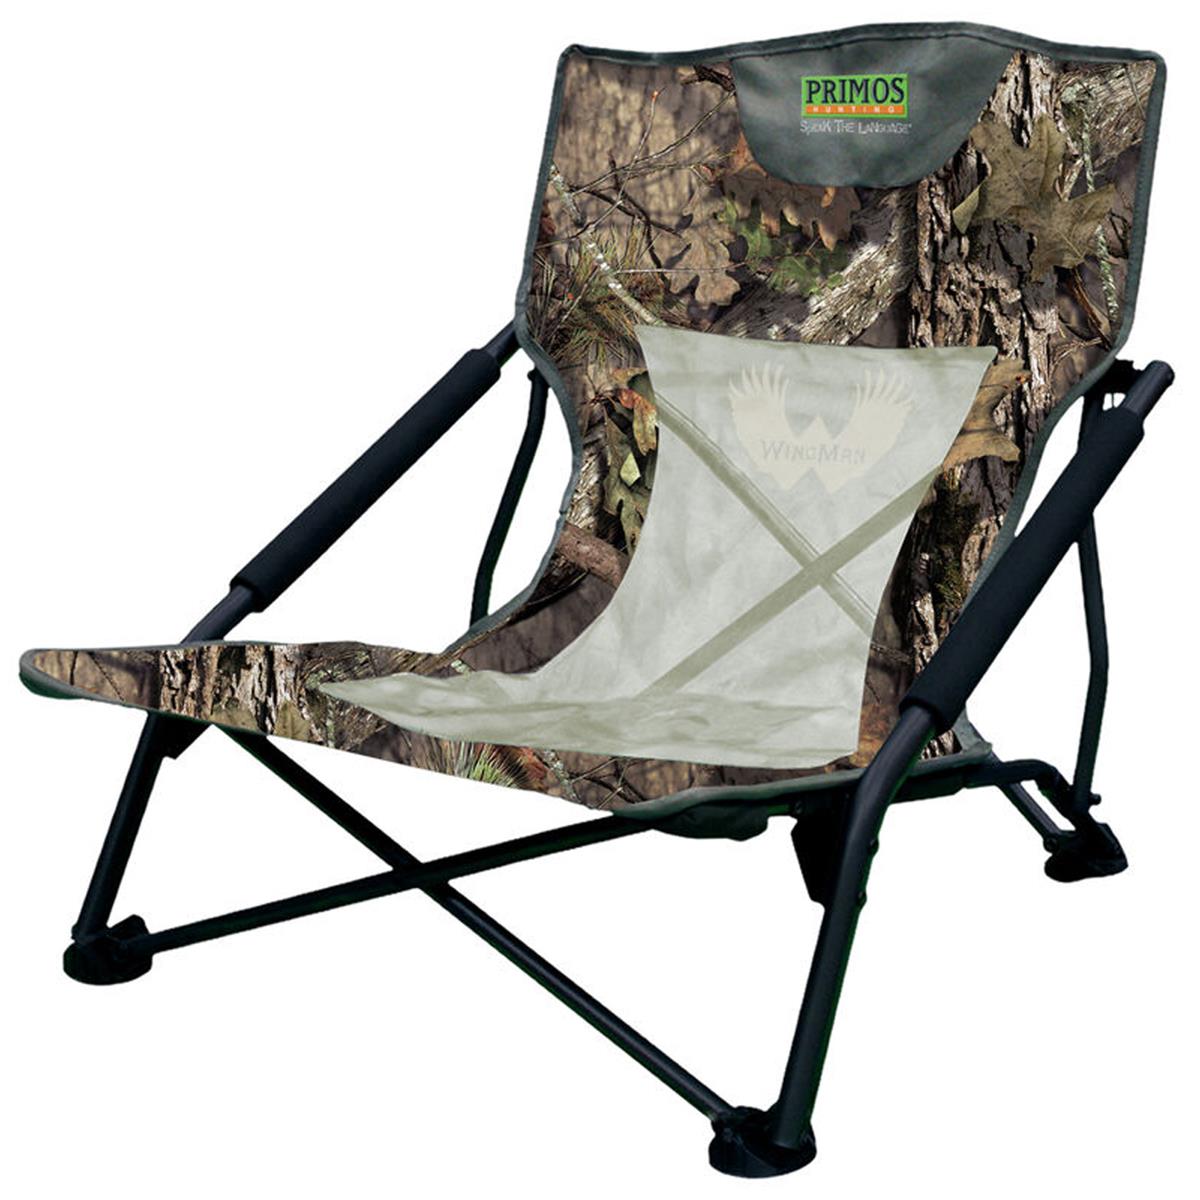 Image of Bushnell Wing Man Turkey Chair